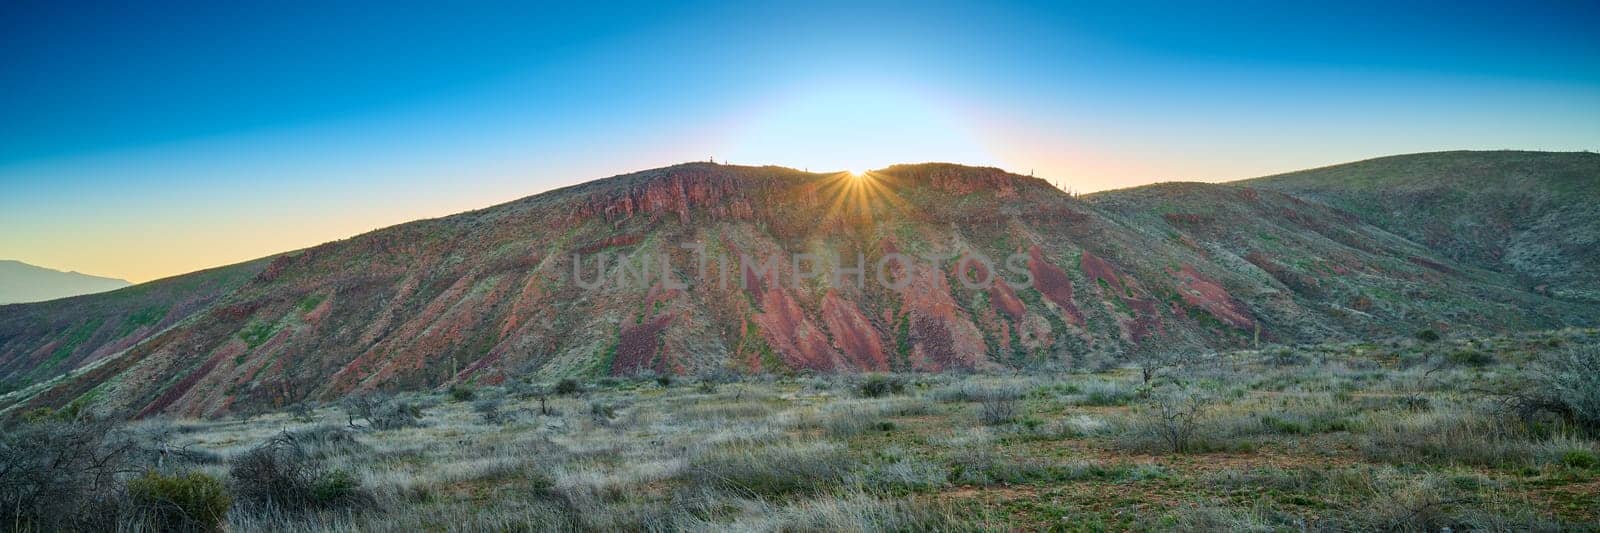 Sunrise over red rock cliffs in Tonto National Forest, Arizona.